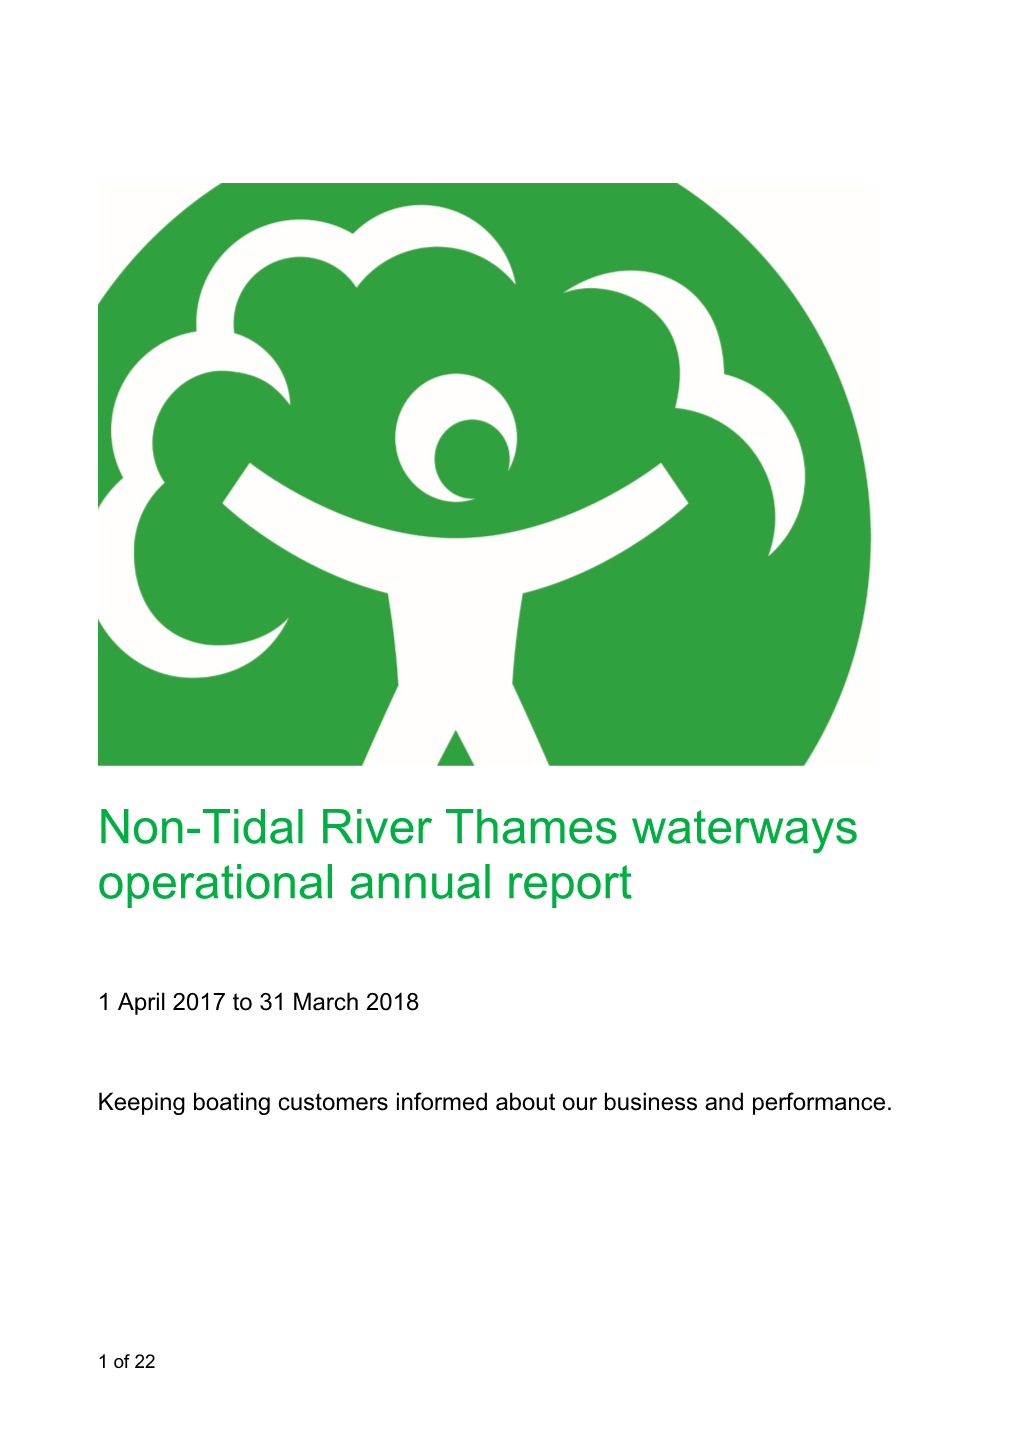 Non-Tidal River Thames Waterways Operational Annual Report